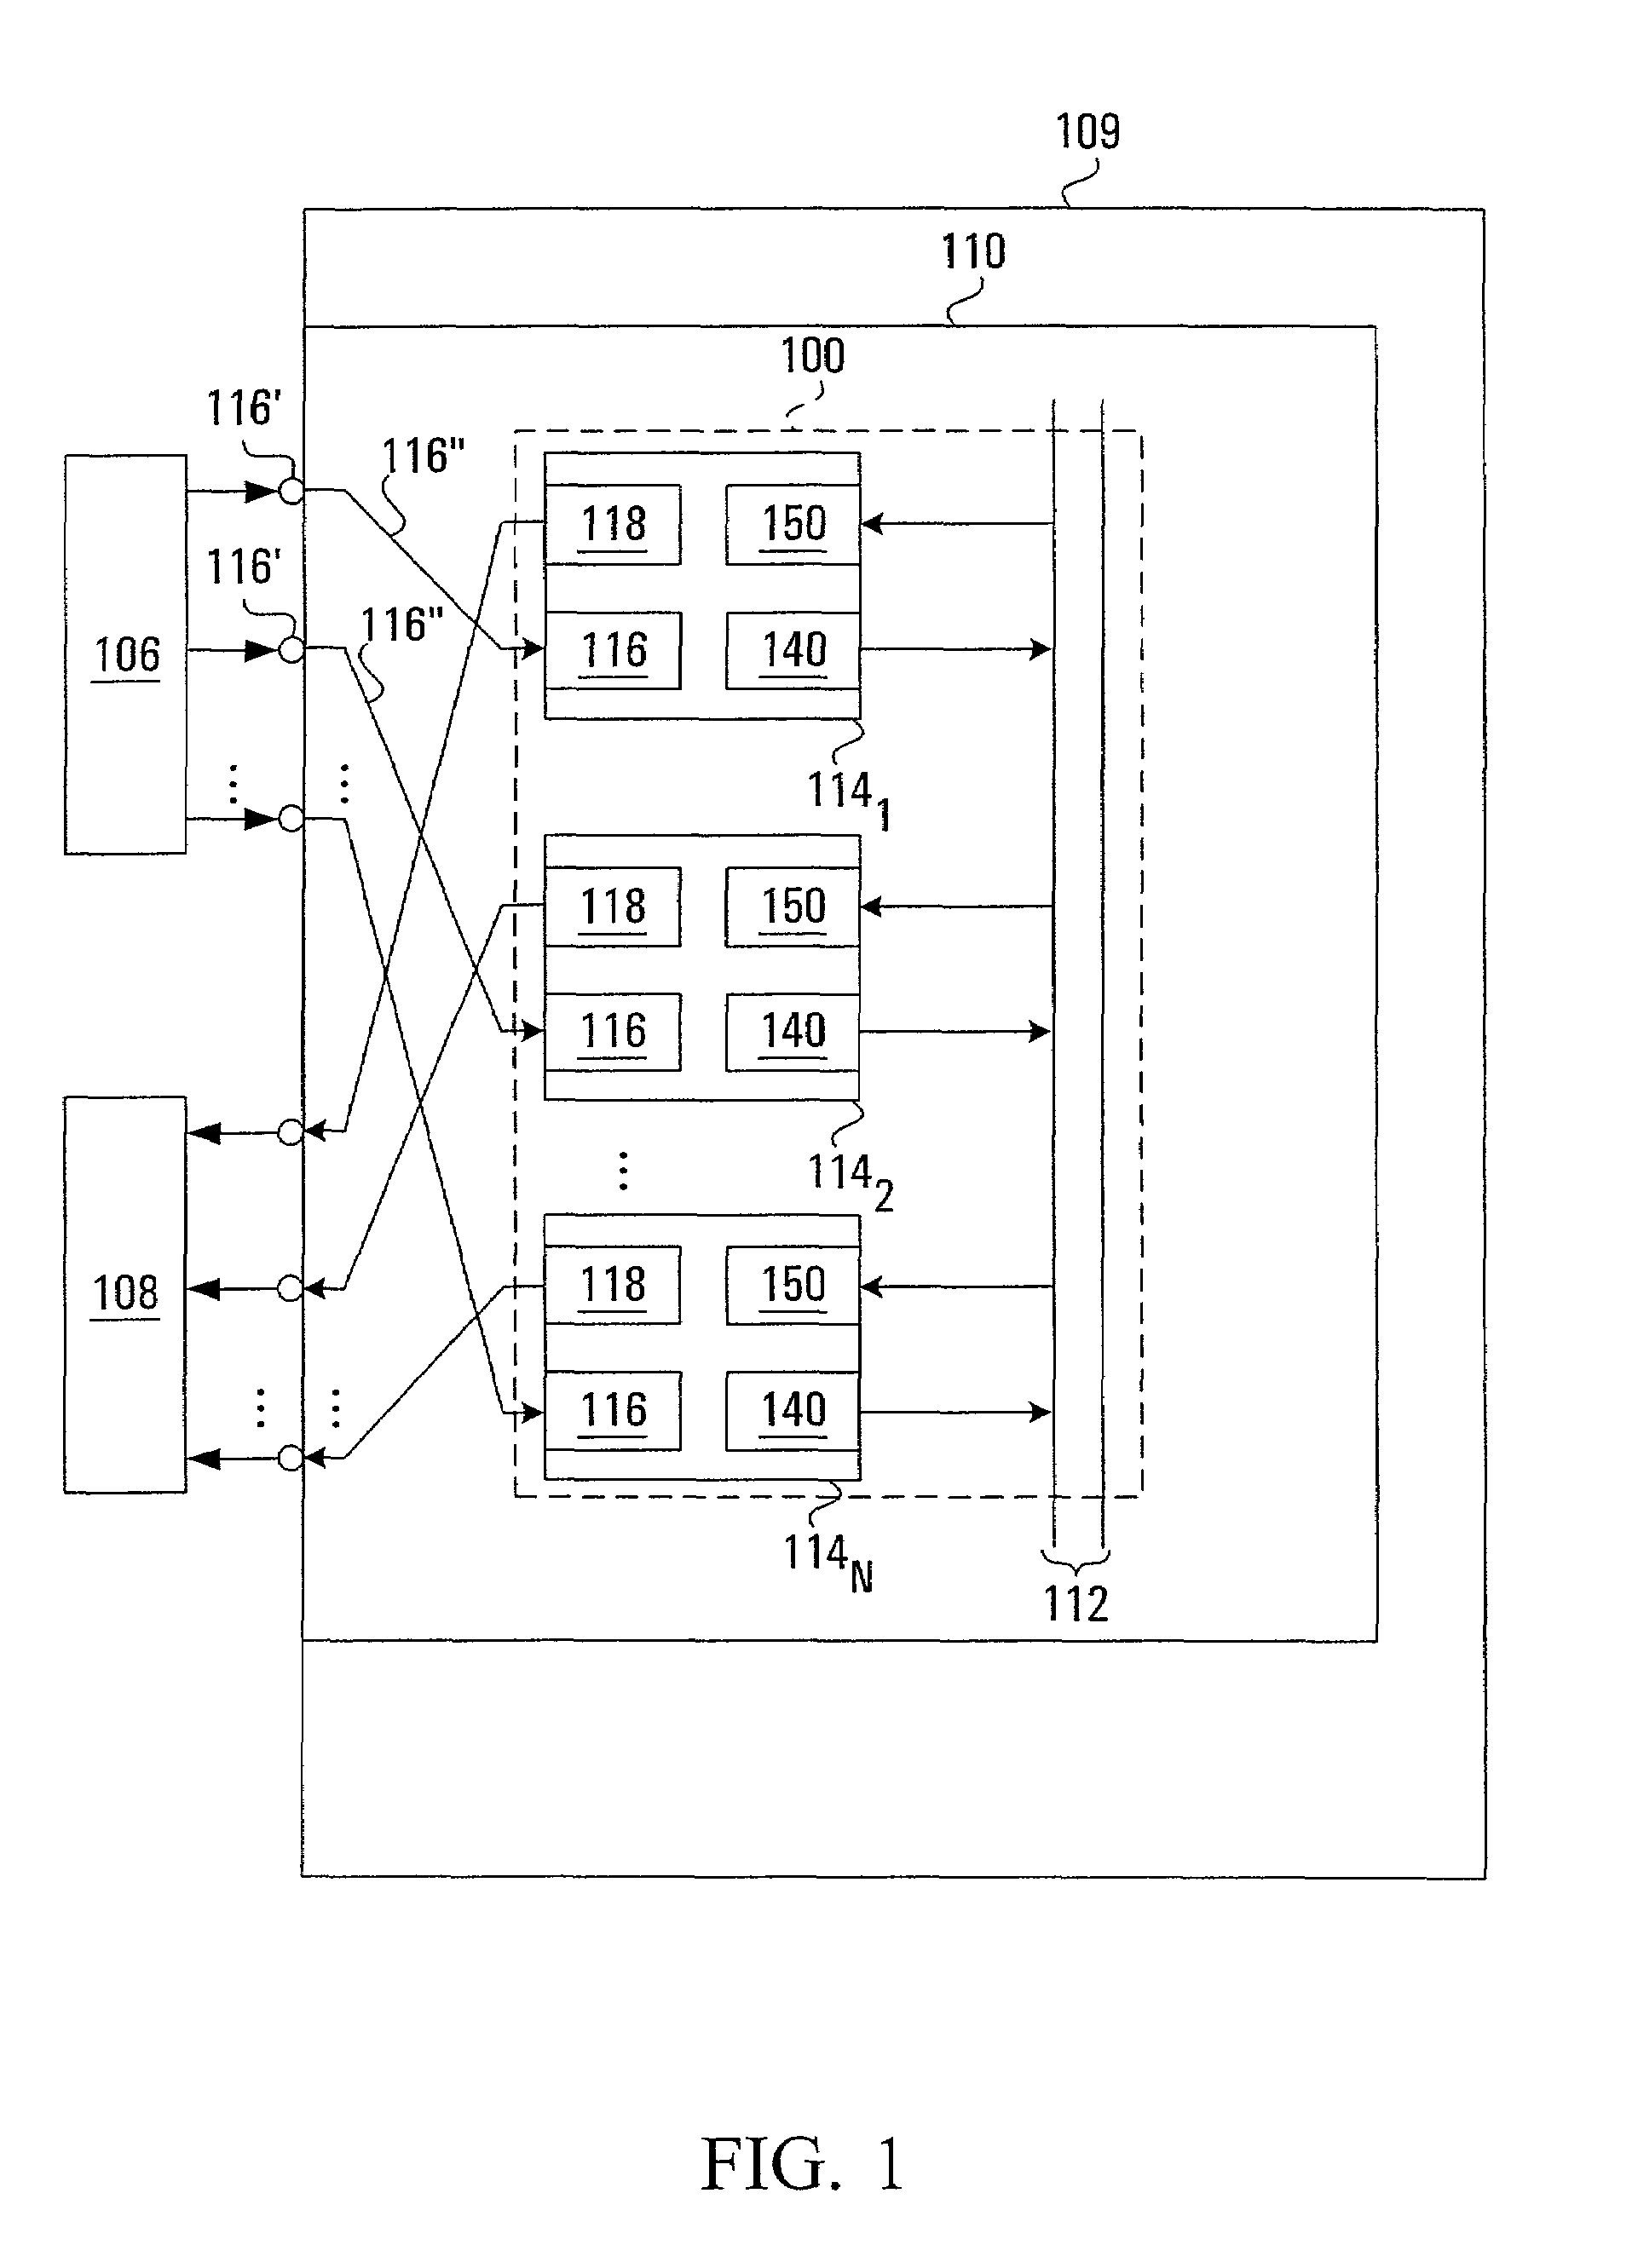 Cell-based switch fabric with inter-cell control for regulating packet flow